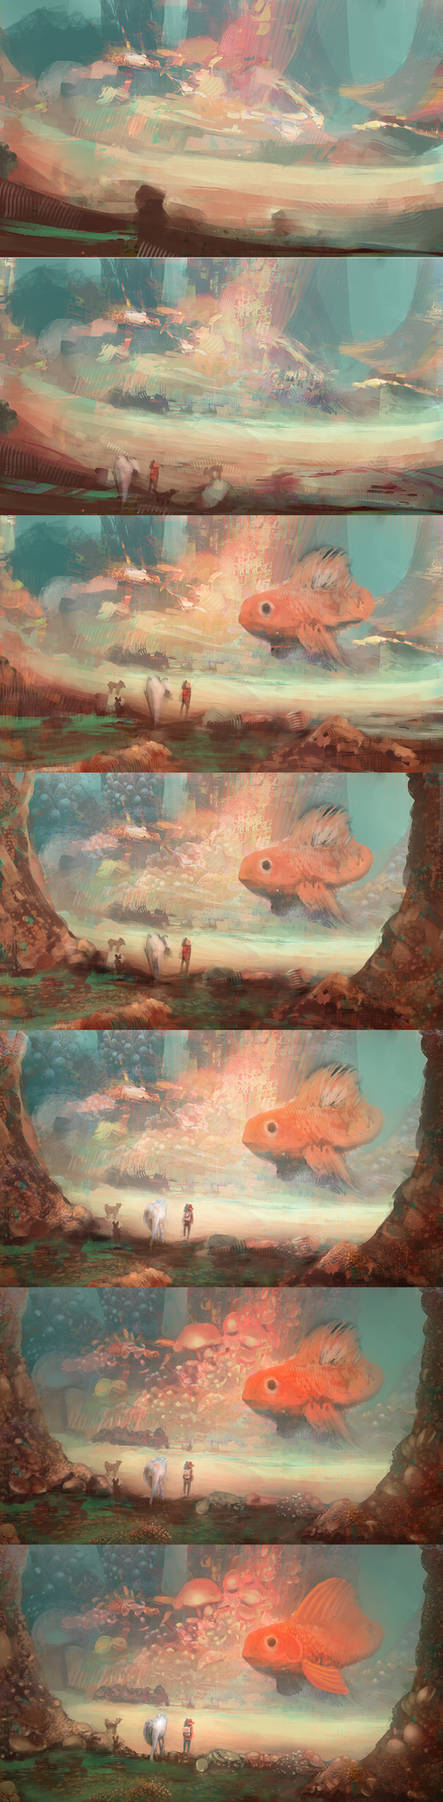 The journey and the big fish (process) by Mocaran